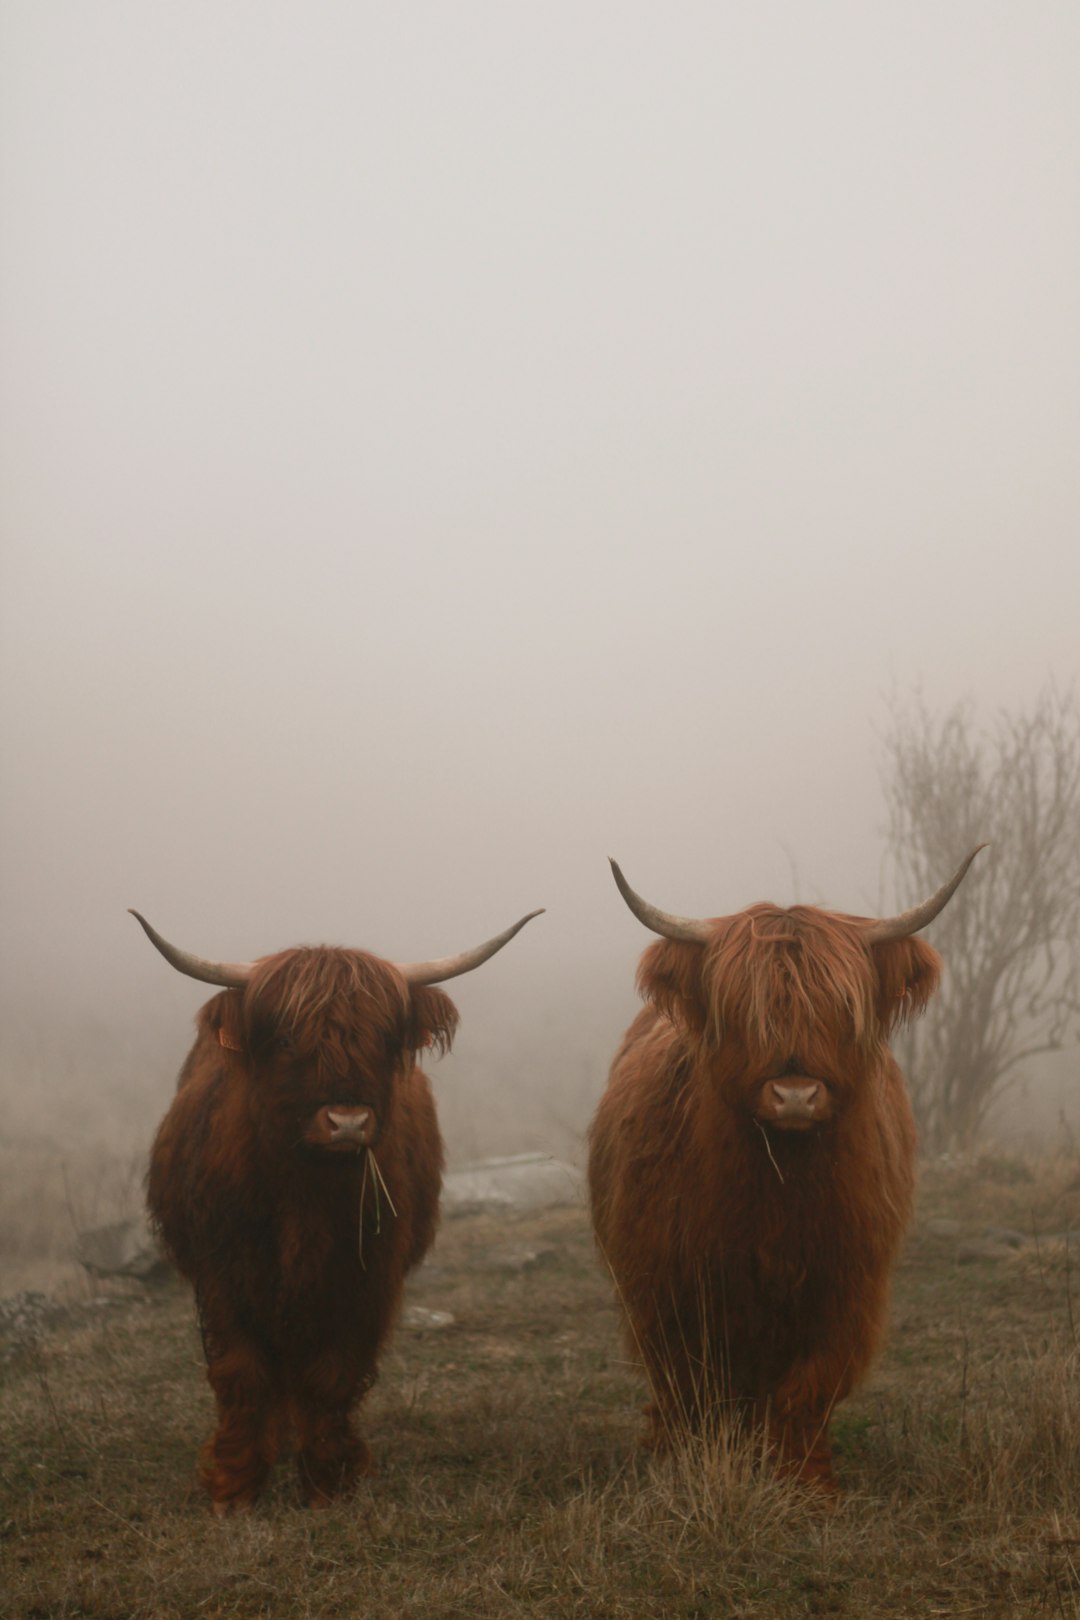 highland cows in a misty foggy landscape, two highland cows looking at the camera, photographed in the style of [Romina Ressia](https://goo.gl/search?artist%20Romina%20Ressia) and [Henri Cartier-Bresson](https://goo.gl/search?artist%20Henri%20Cartier-Bresson) –ar 85:128